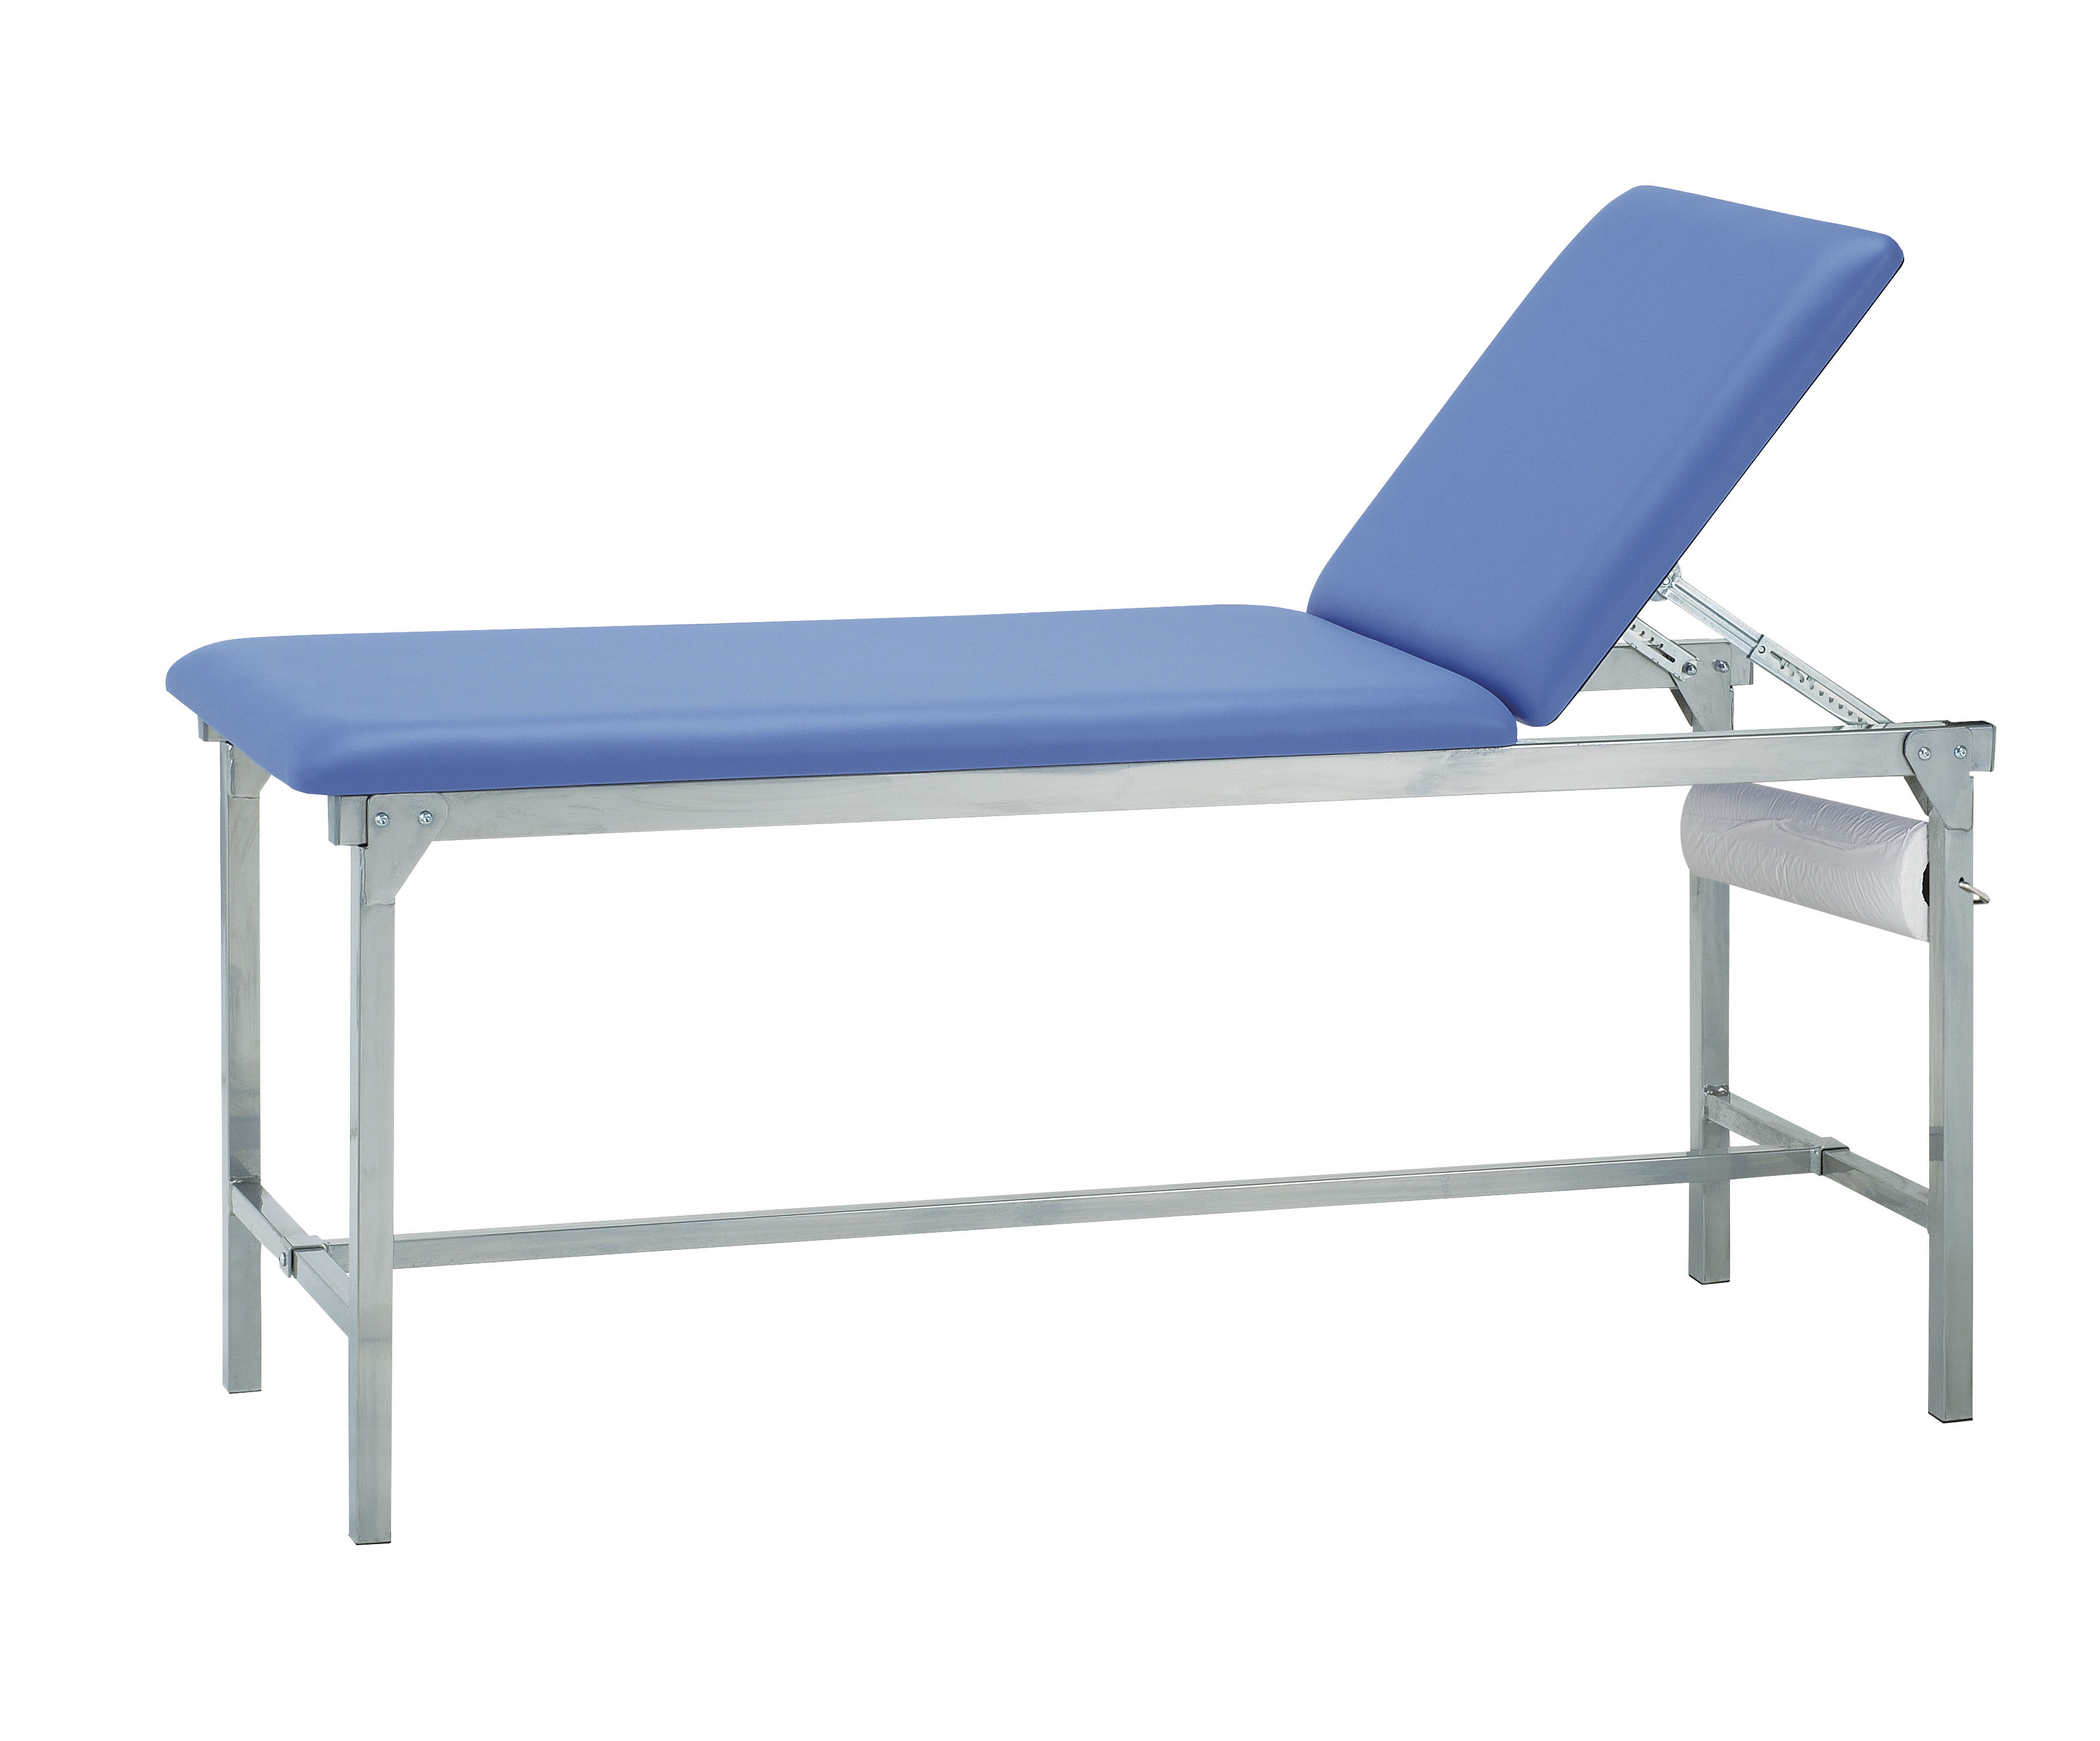 Examination couch width 60cm, height 80cm, color TAHITI